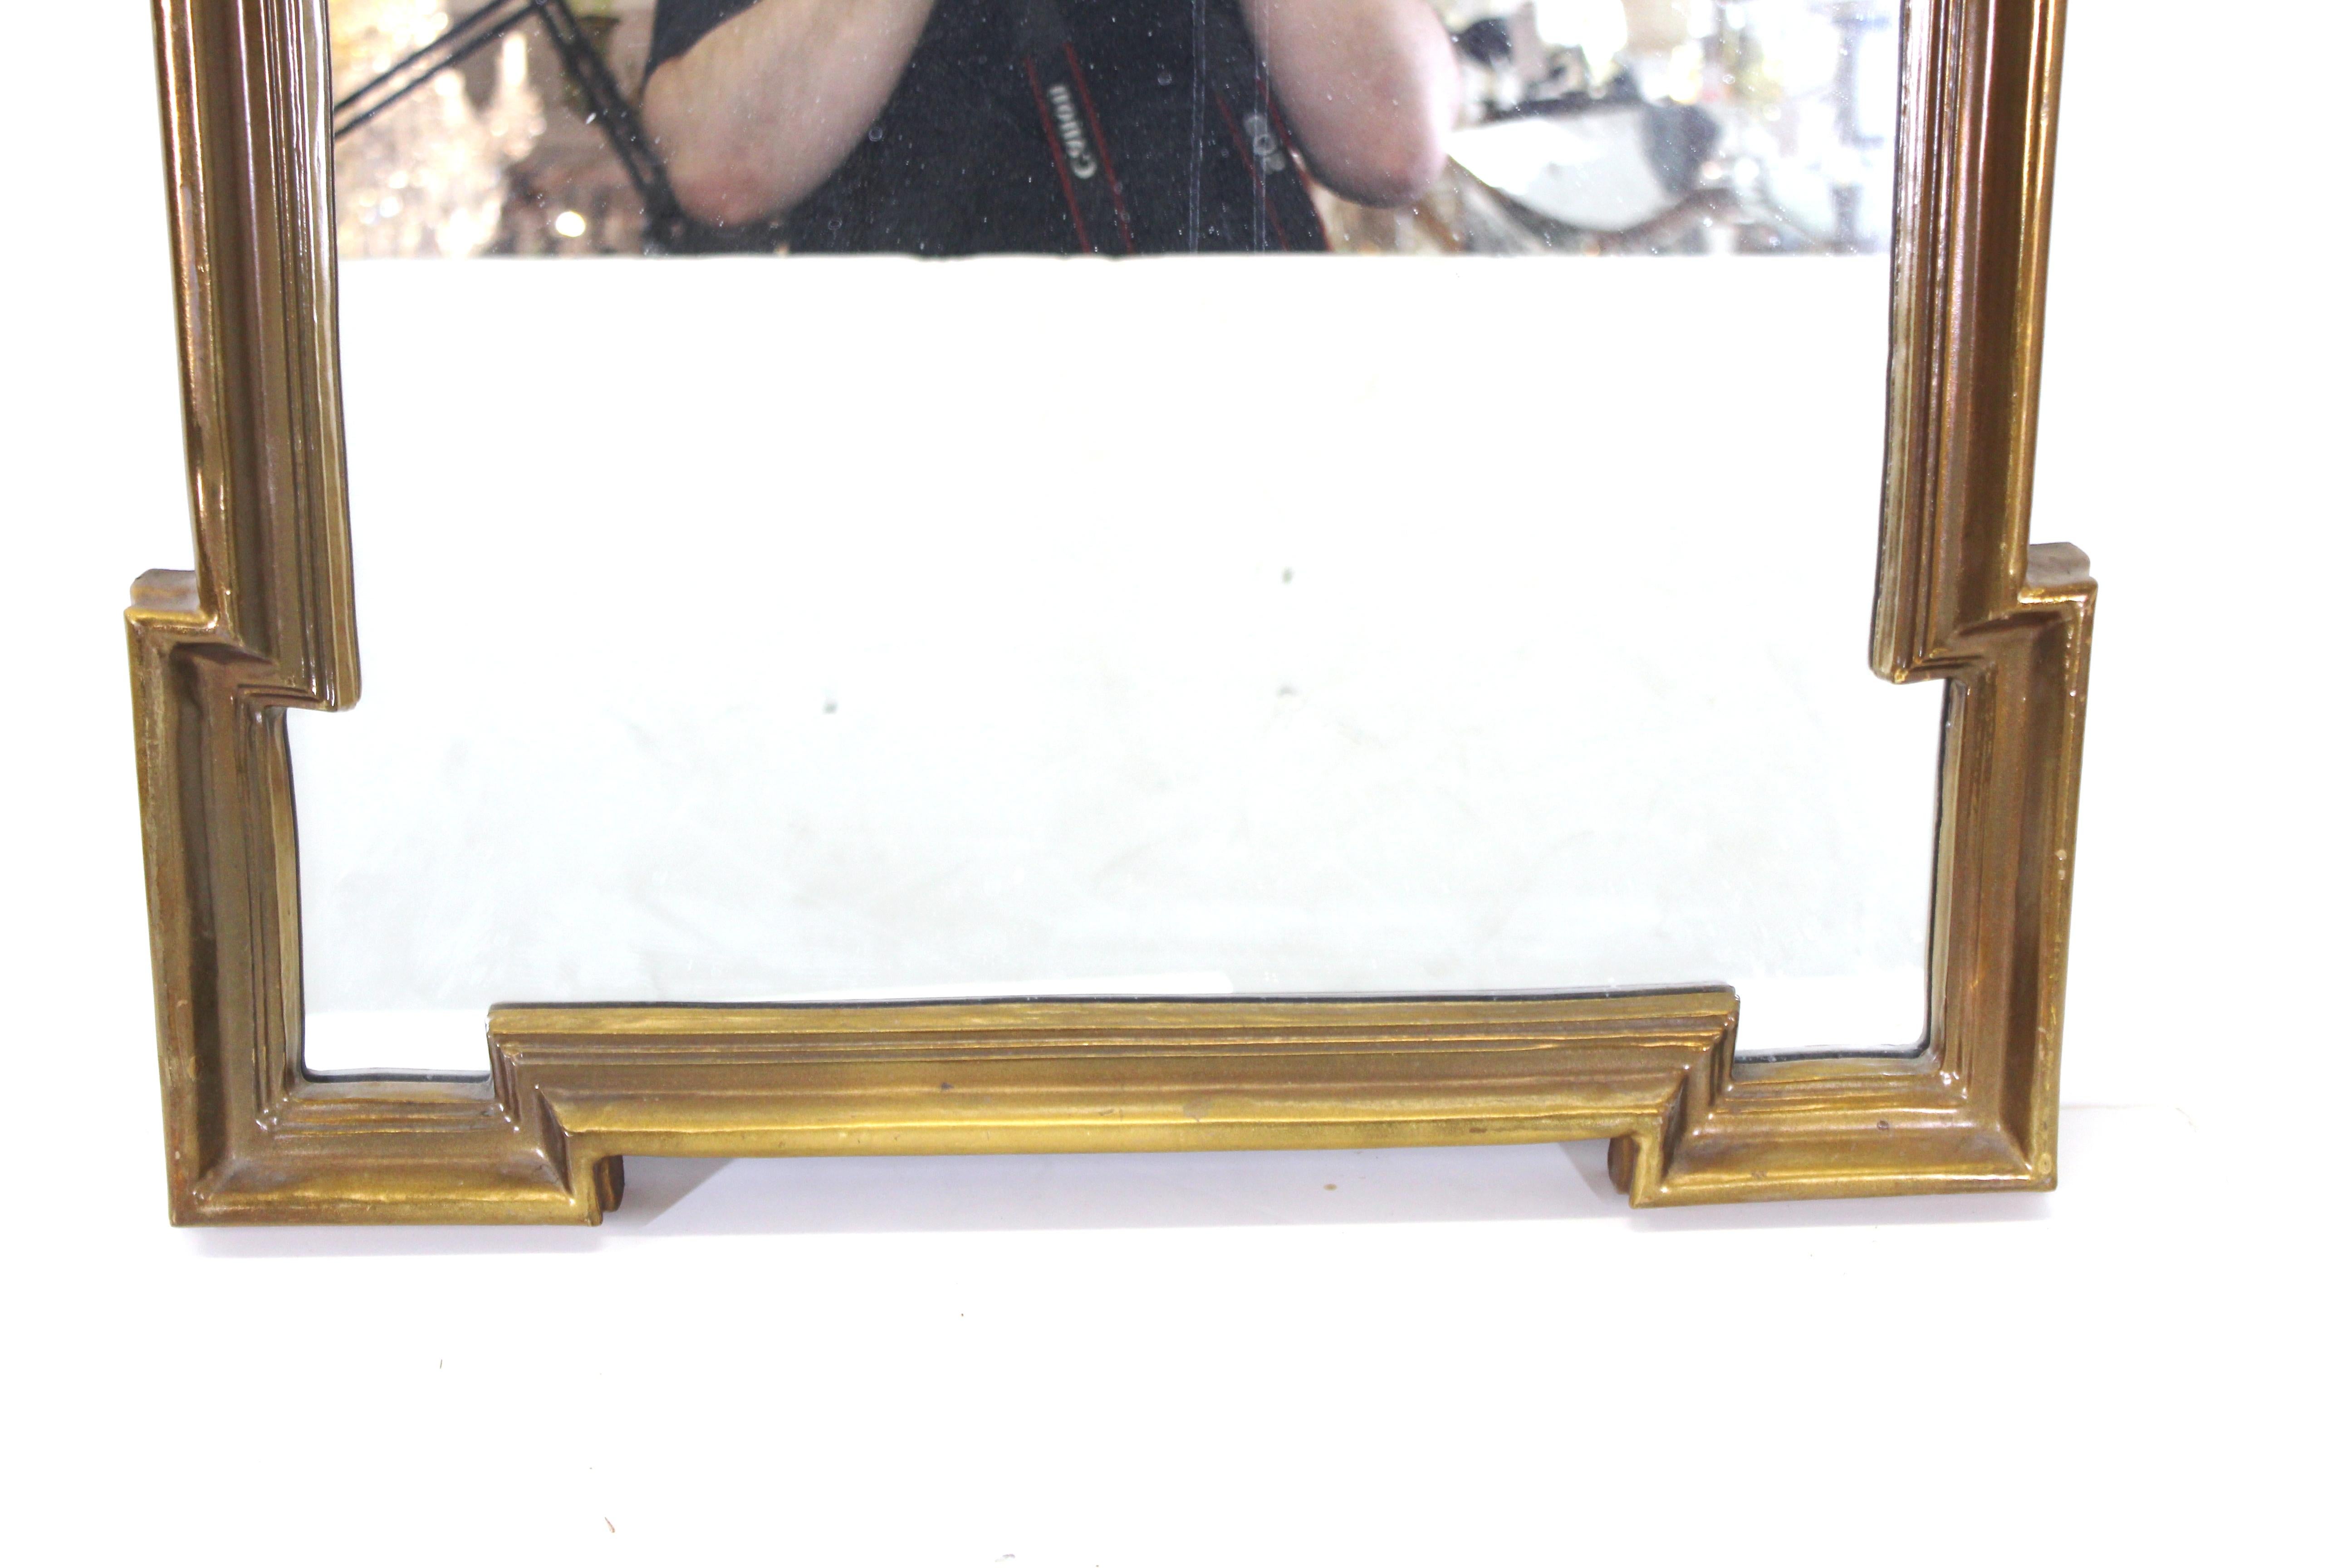 Hollywood Regency style wall mirror with giltwood frame with carved Baroque style elements.